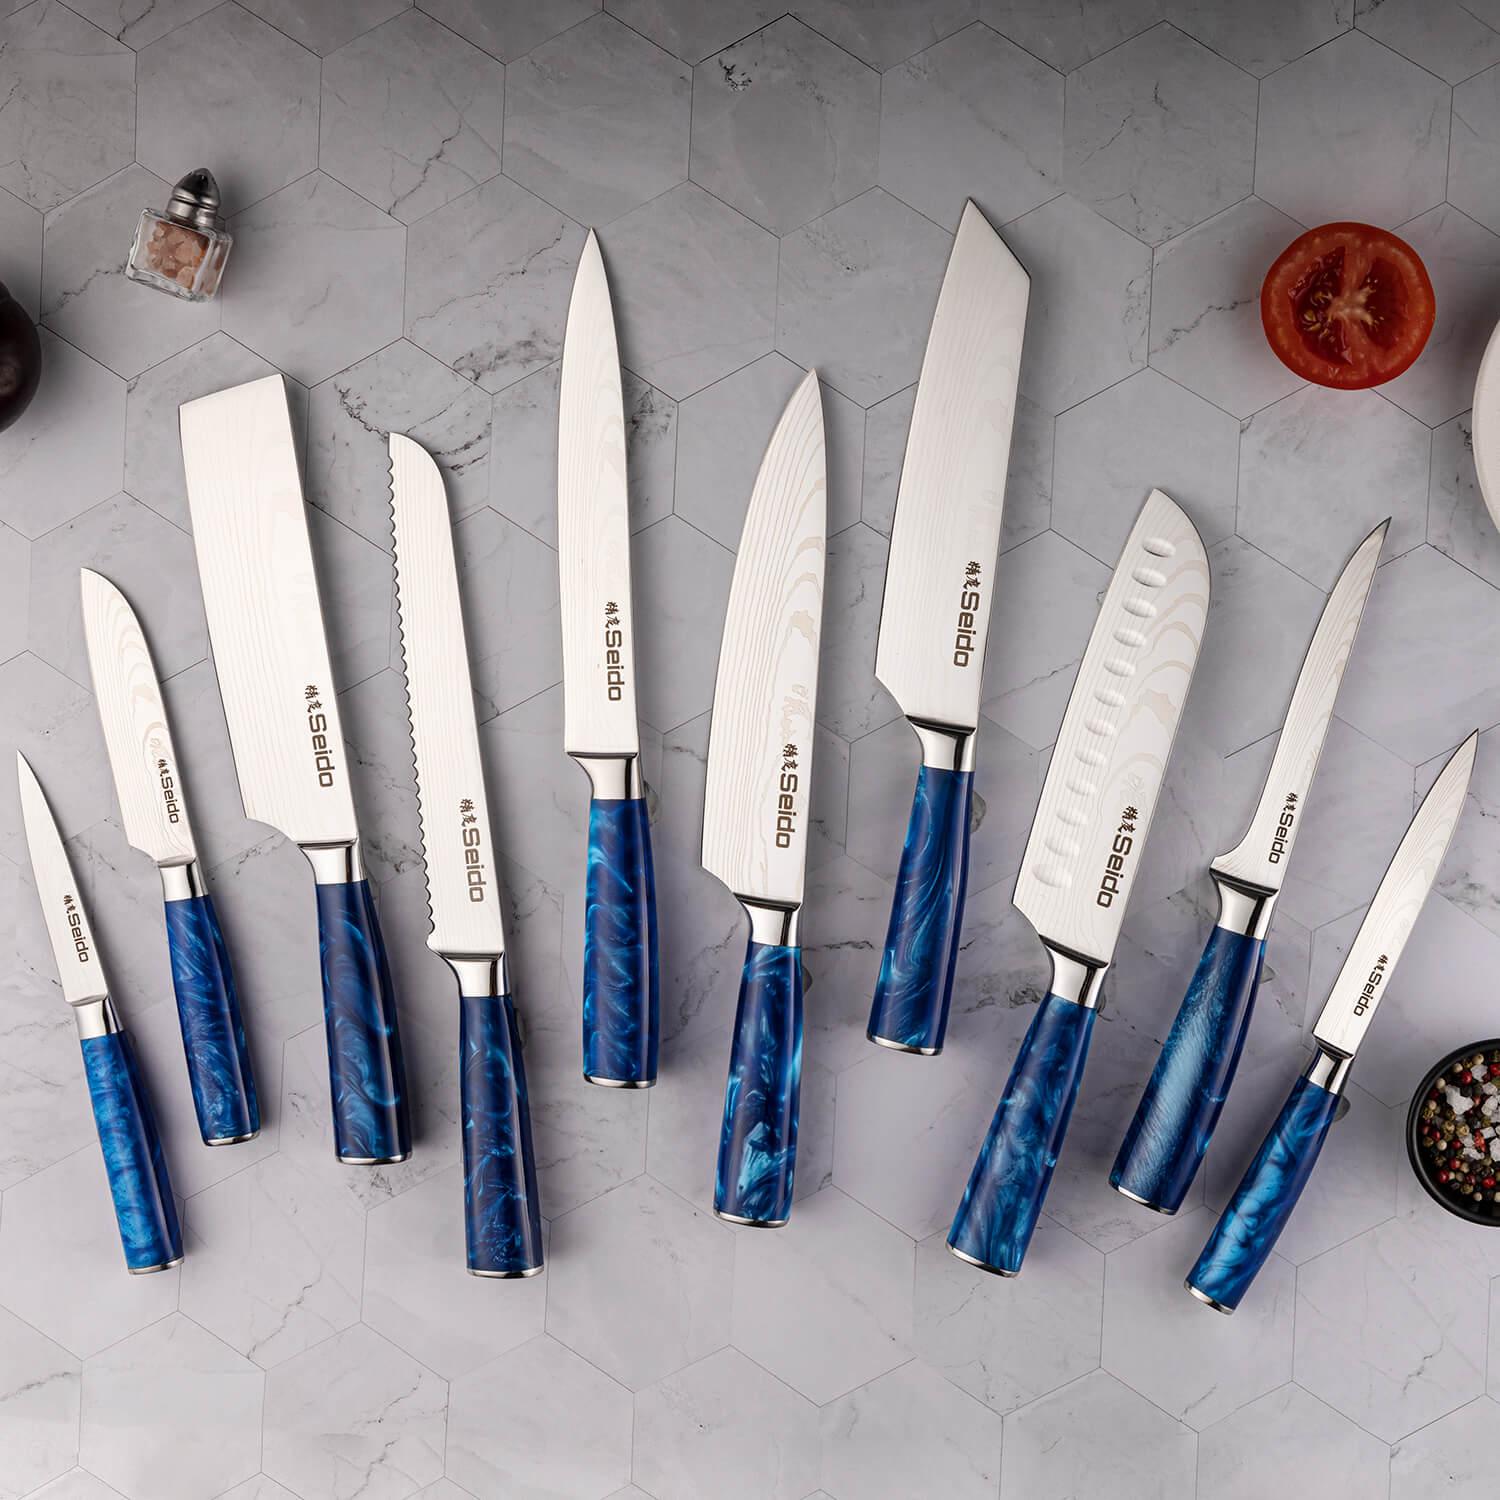 Behold the Tengoku Chef Knife Set from Seido Knives! A collection of knives with blue handles, arranged on a counter.